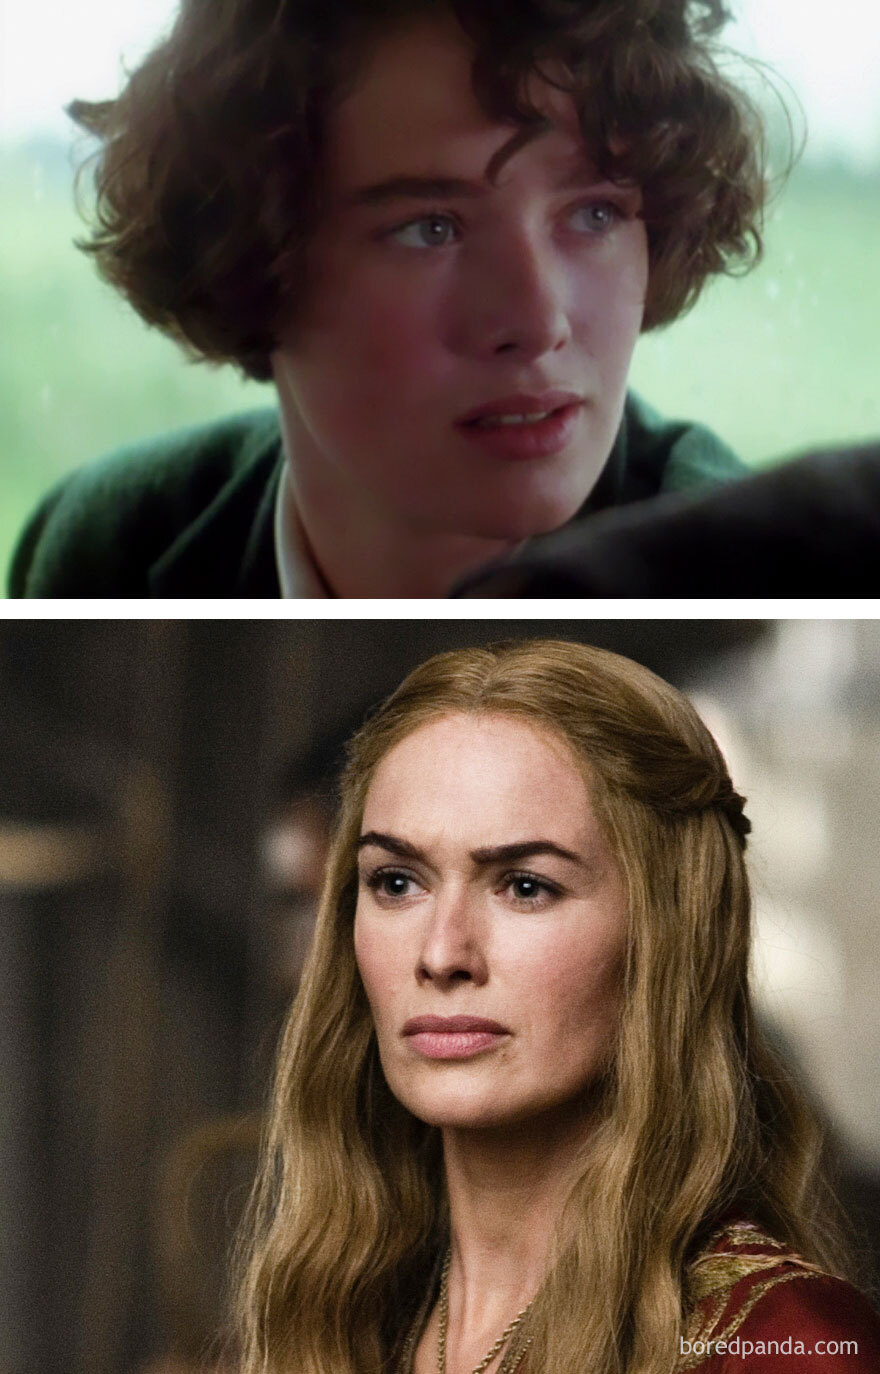 game-of-thrones-actors-then-and-now-young-10-57557471d6913__880